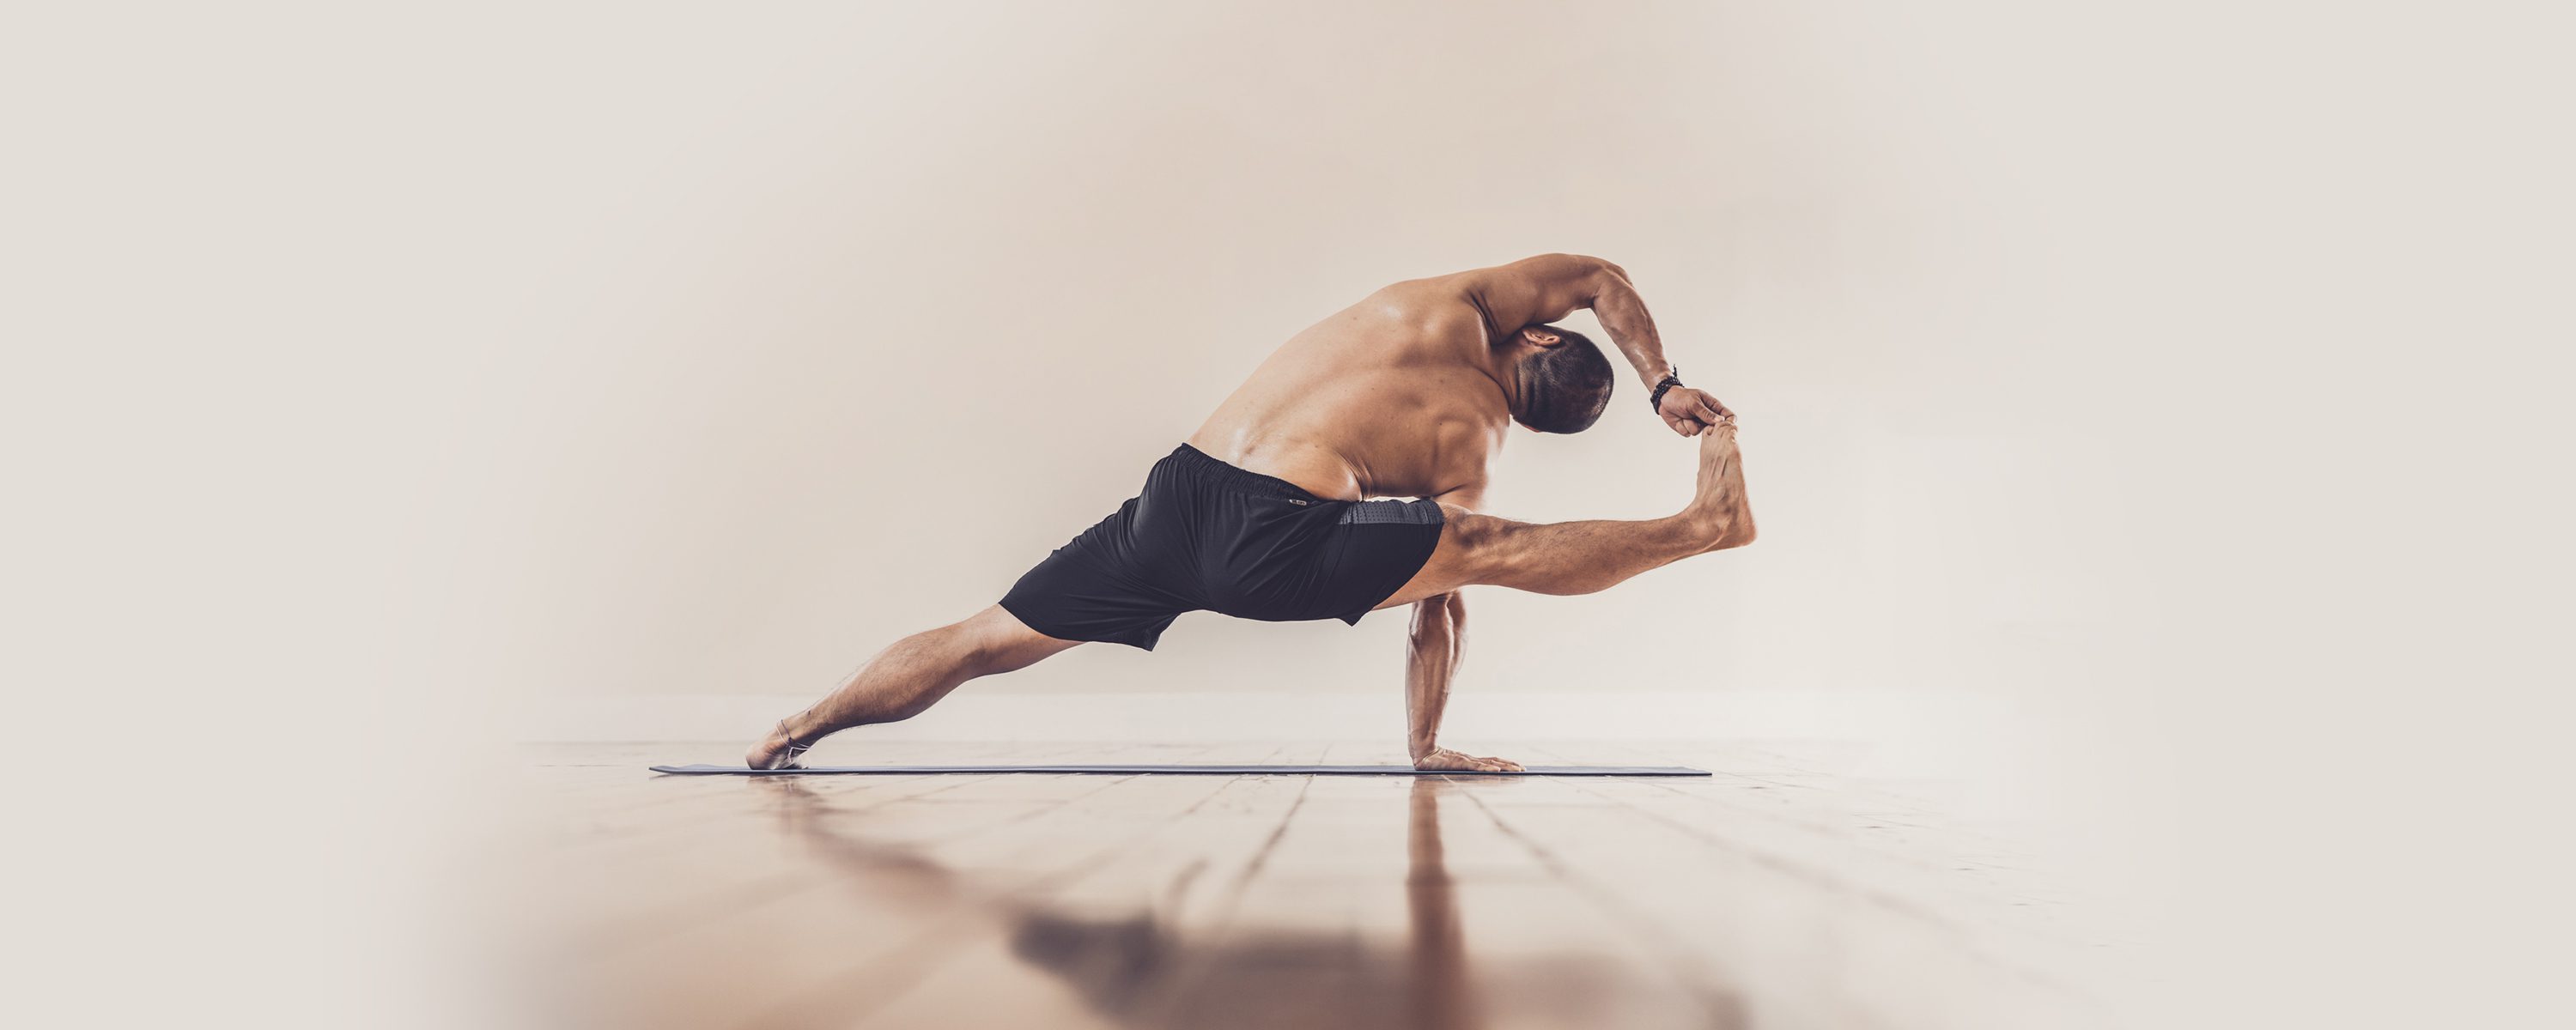 Connecting to a higher power with yoga